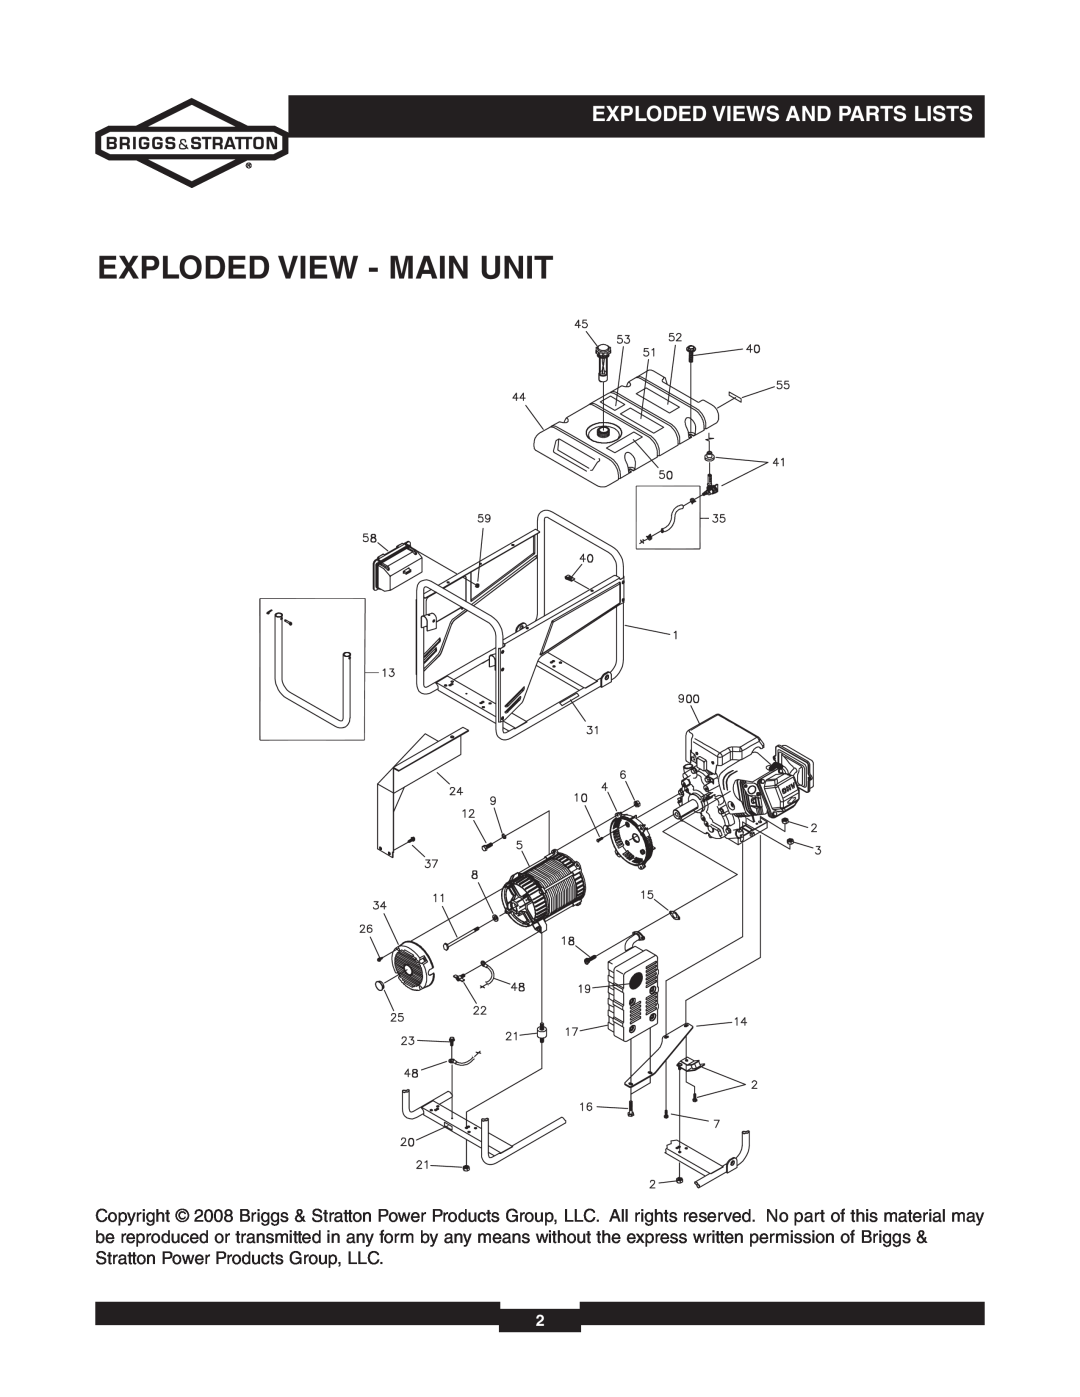 Briggs & Stratton 030235-02 manual Exploded View - Main Unit, Exploded Views And Parts Lists 